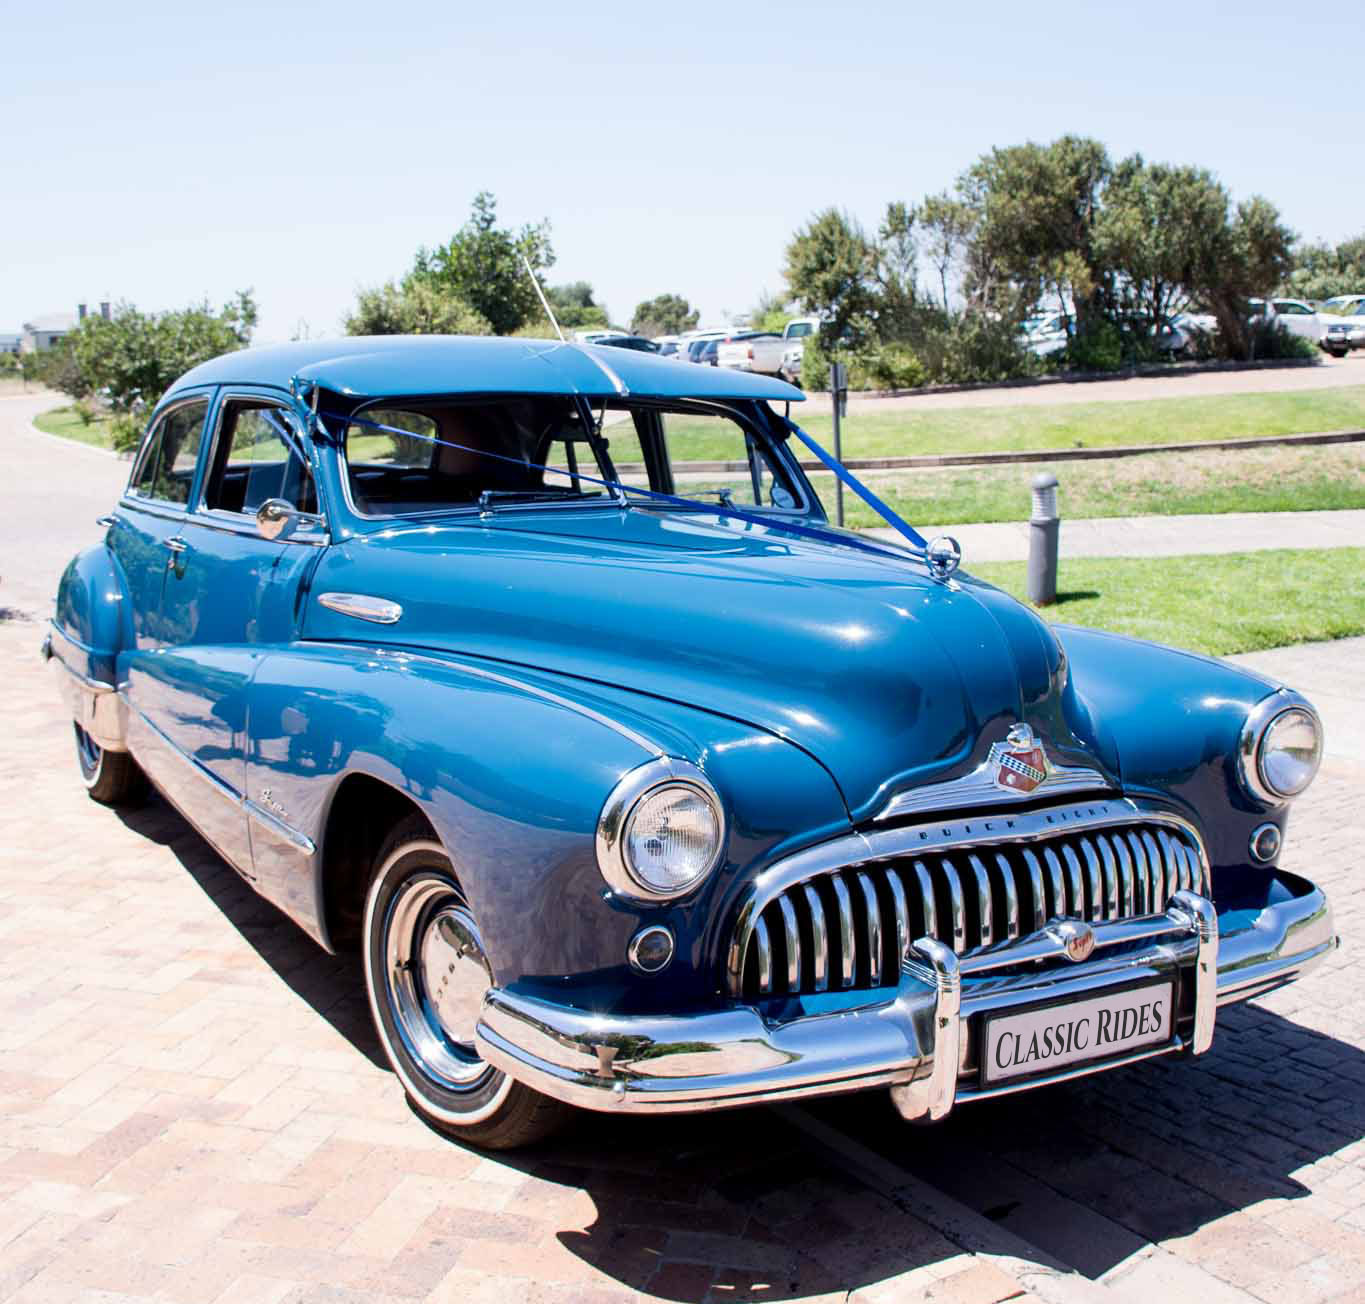 The boisterous blue Buick is ideal for a blue-themed wedding